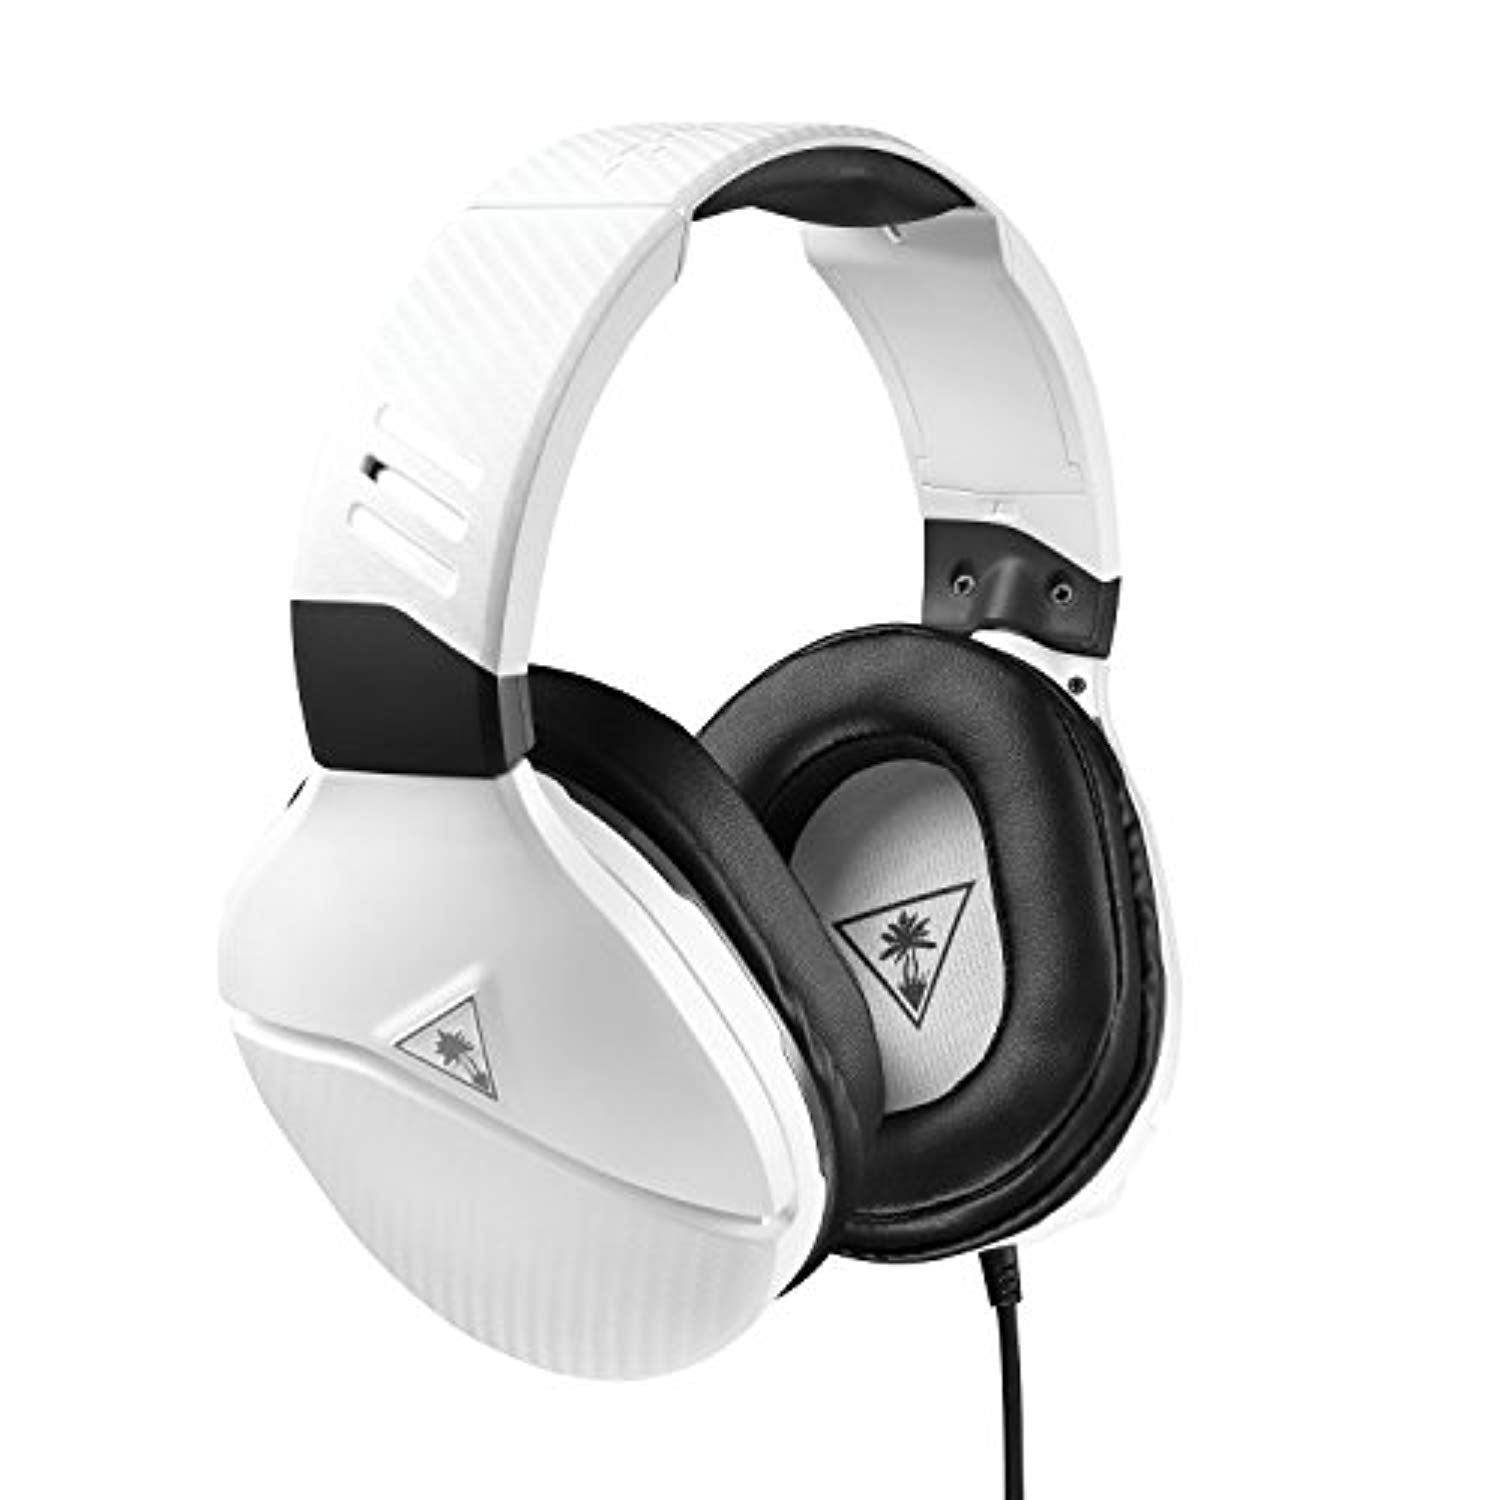 Turtle Beach Recon 200 White Amplified Gaming Headset - Offer Games